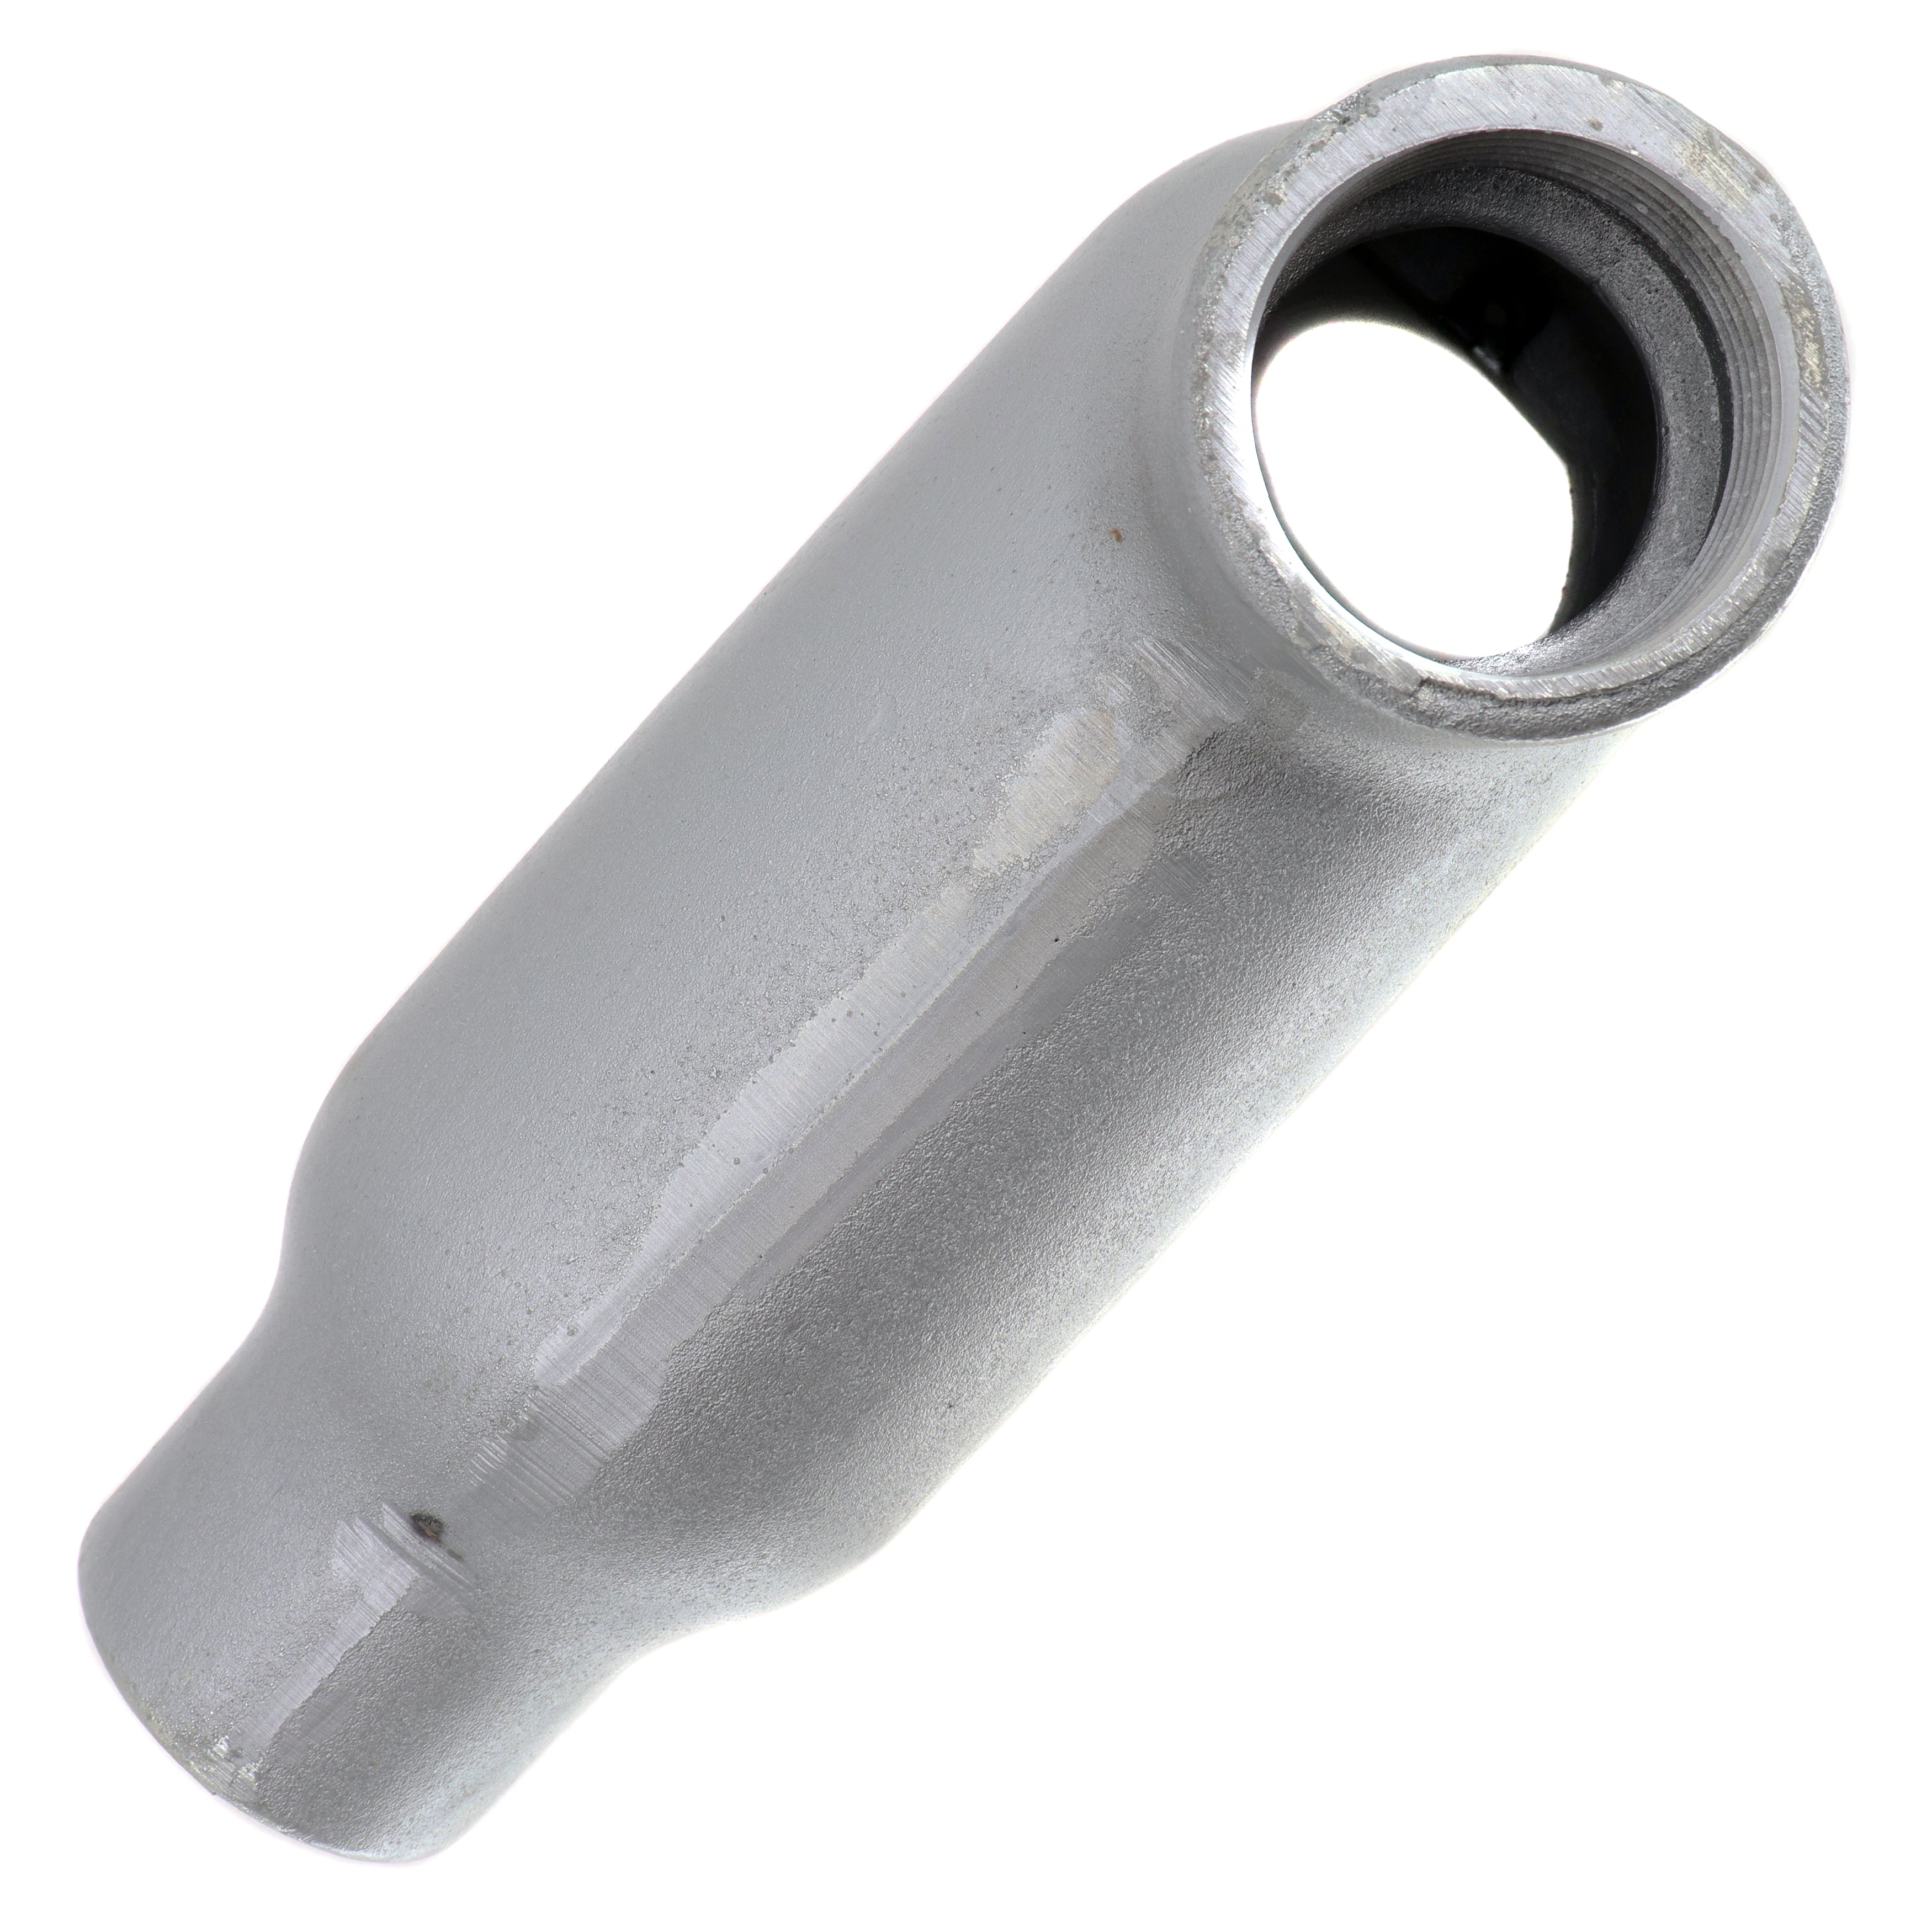 Crouse Hinds, CROUSE HINDS LB68 CAST IRON THREADED CONDUIT BODY FITTING, TYPE LB, FORM-8, 2"